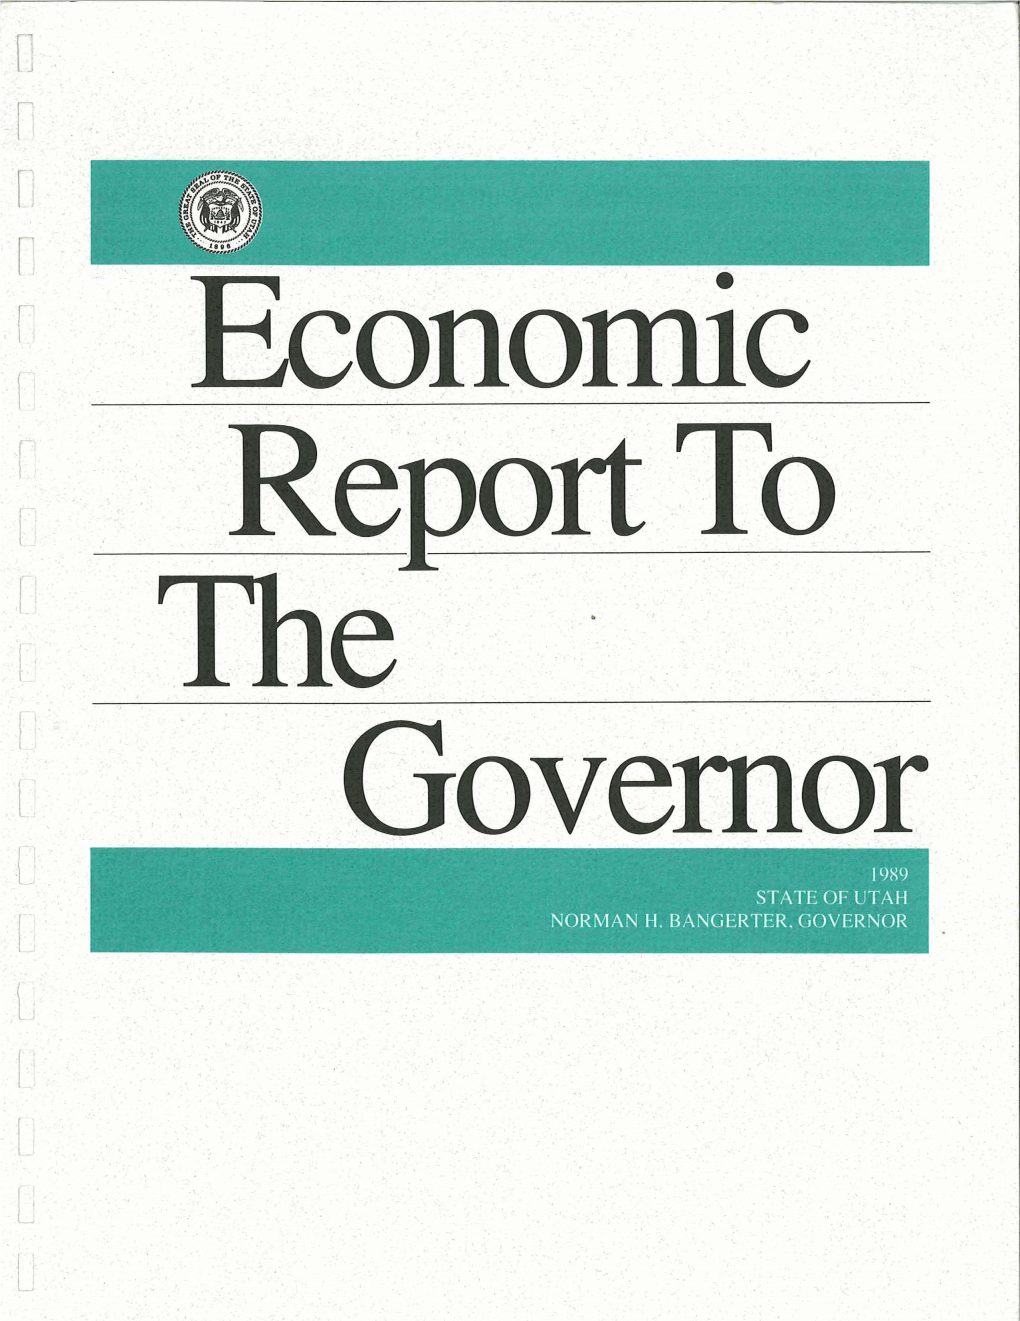 1989 Economic Report to the Governor